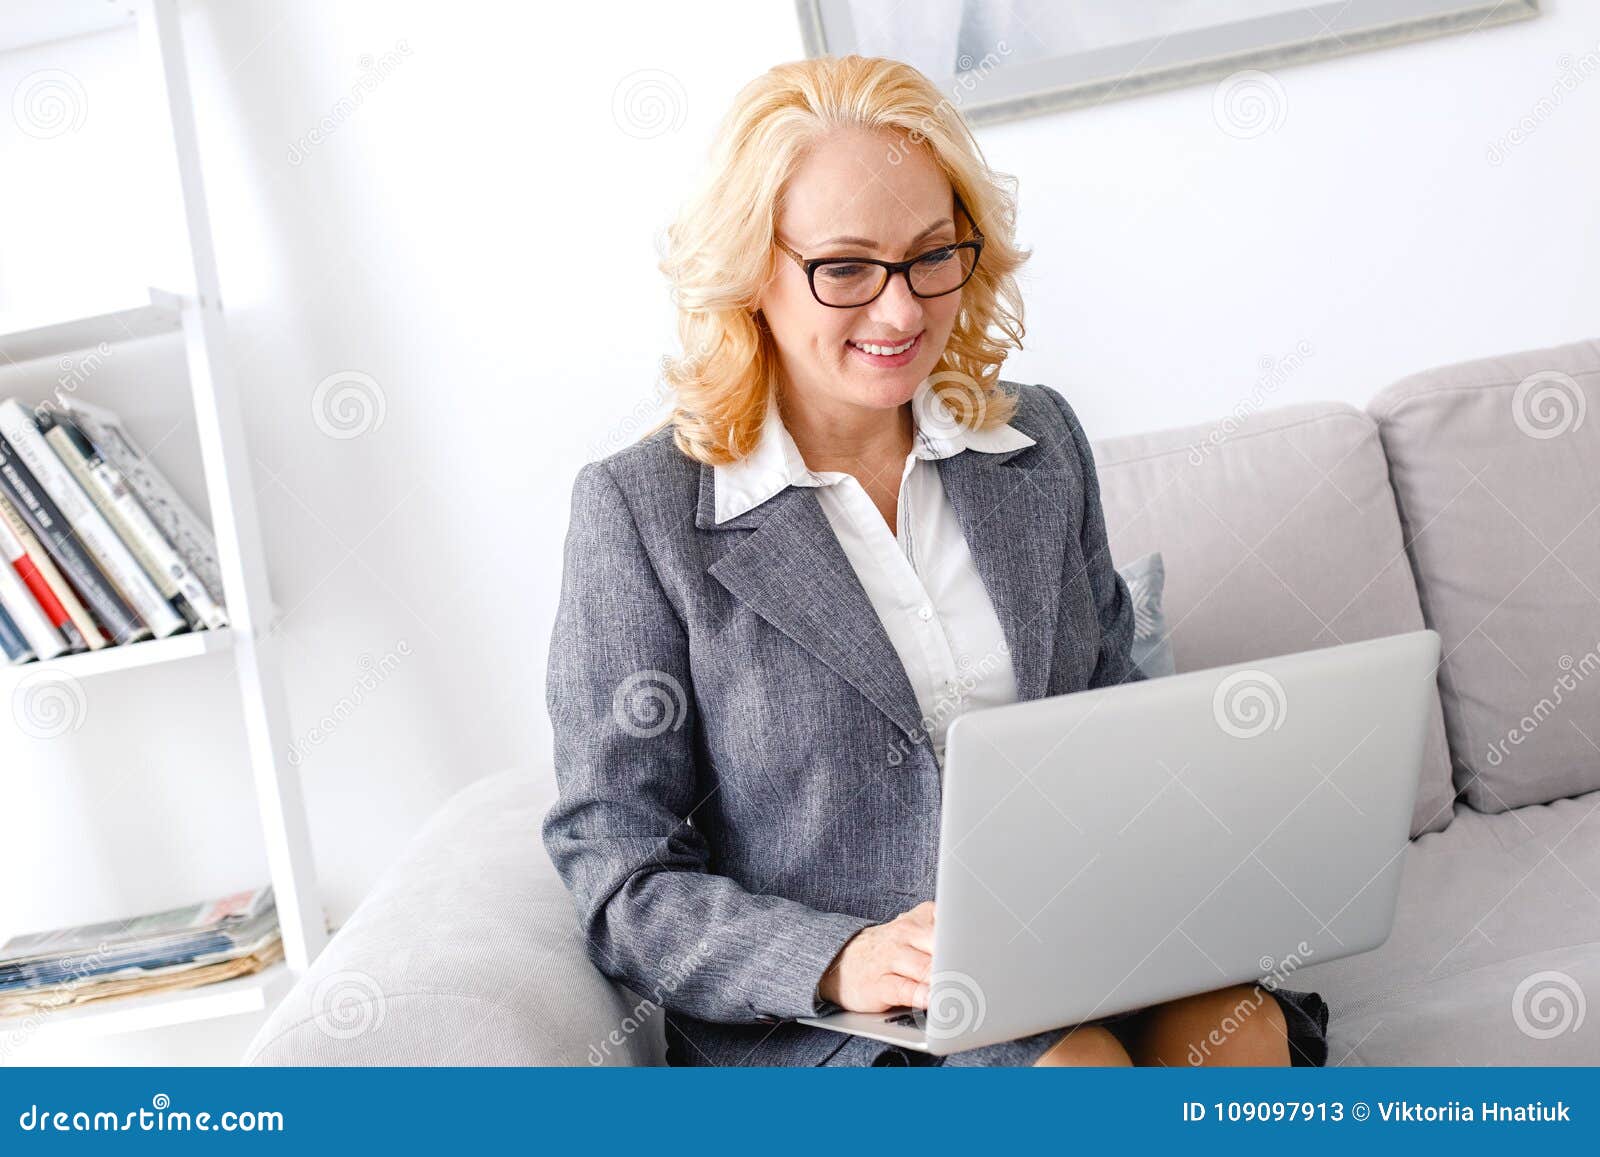 woman psychologist portrait sitting at casual home office online help